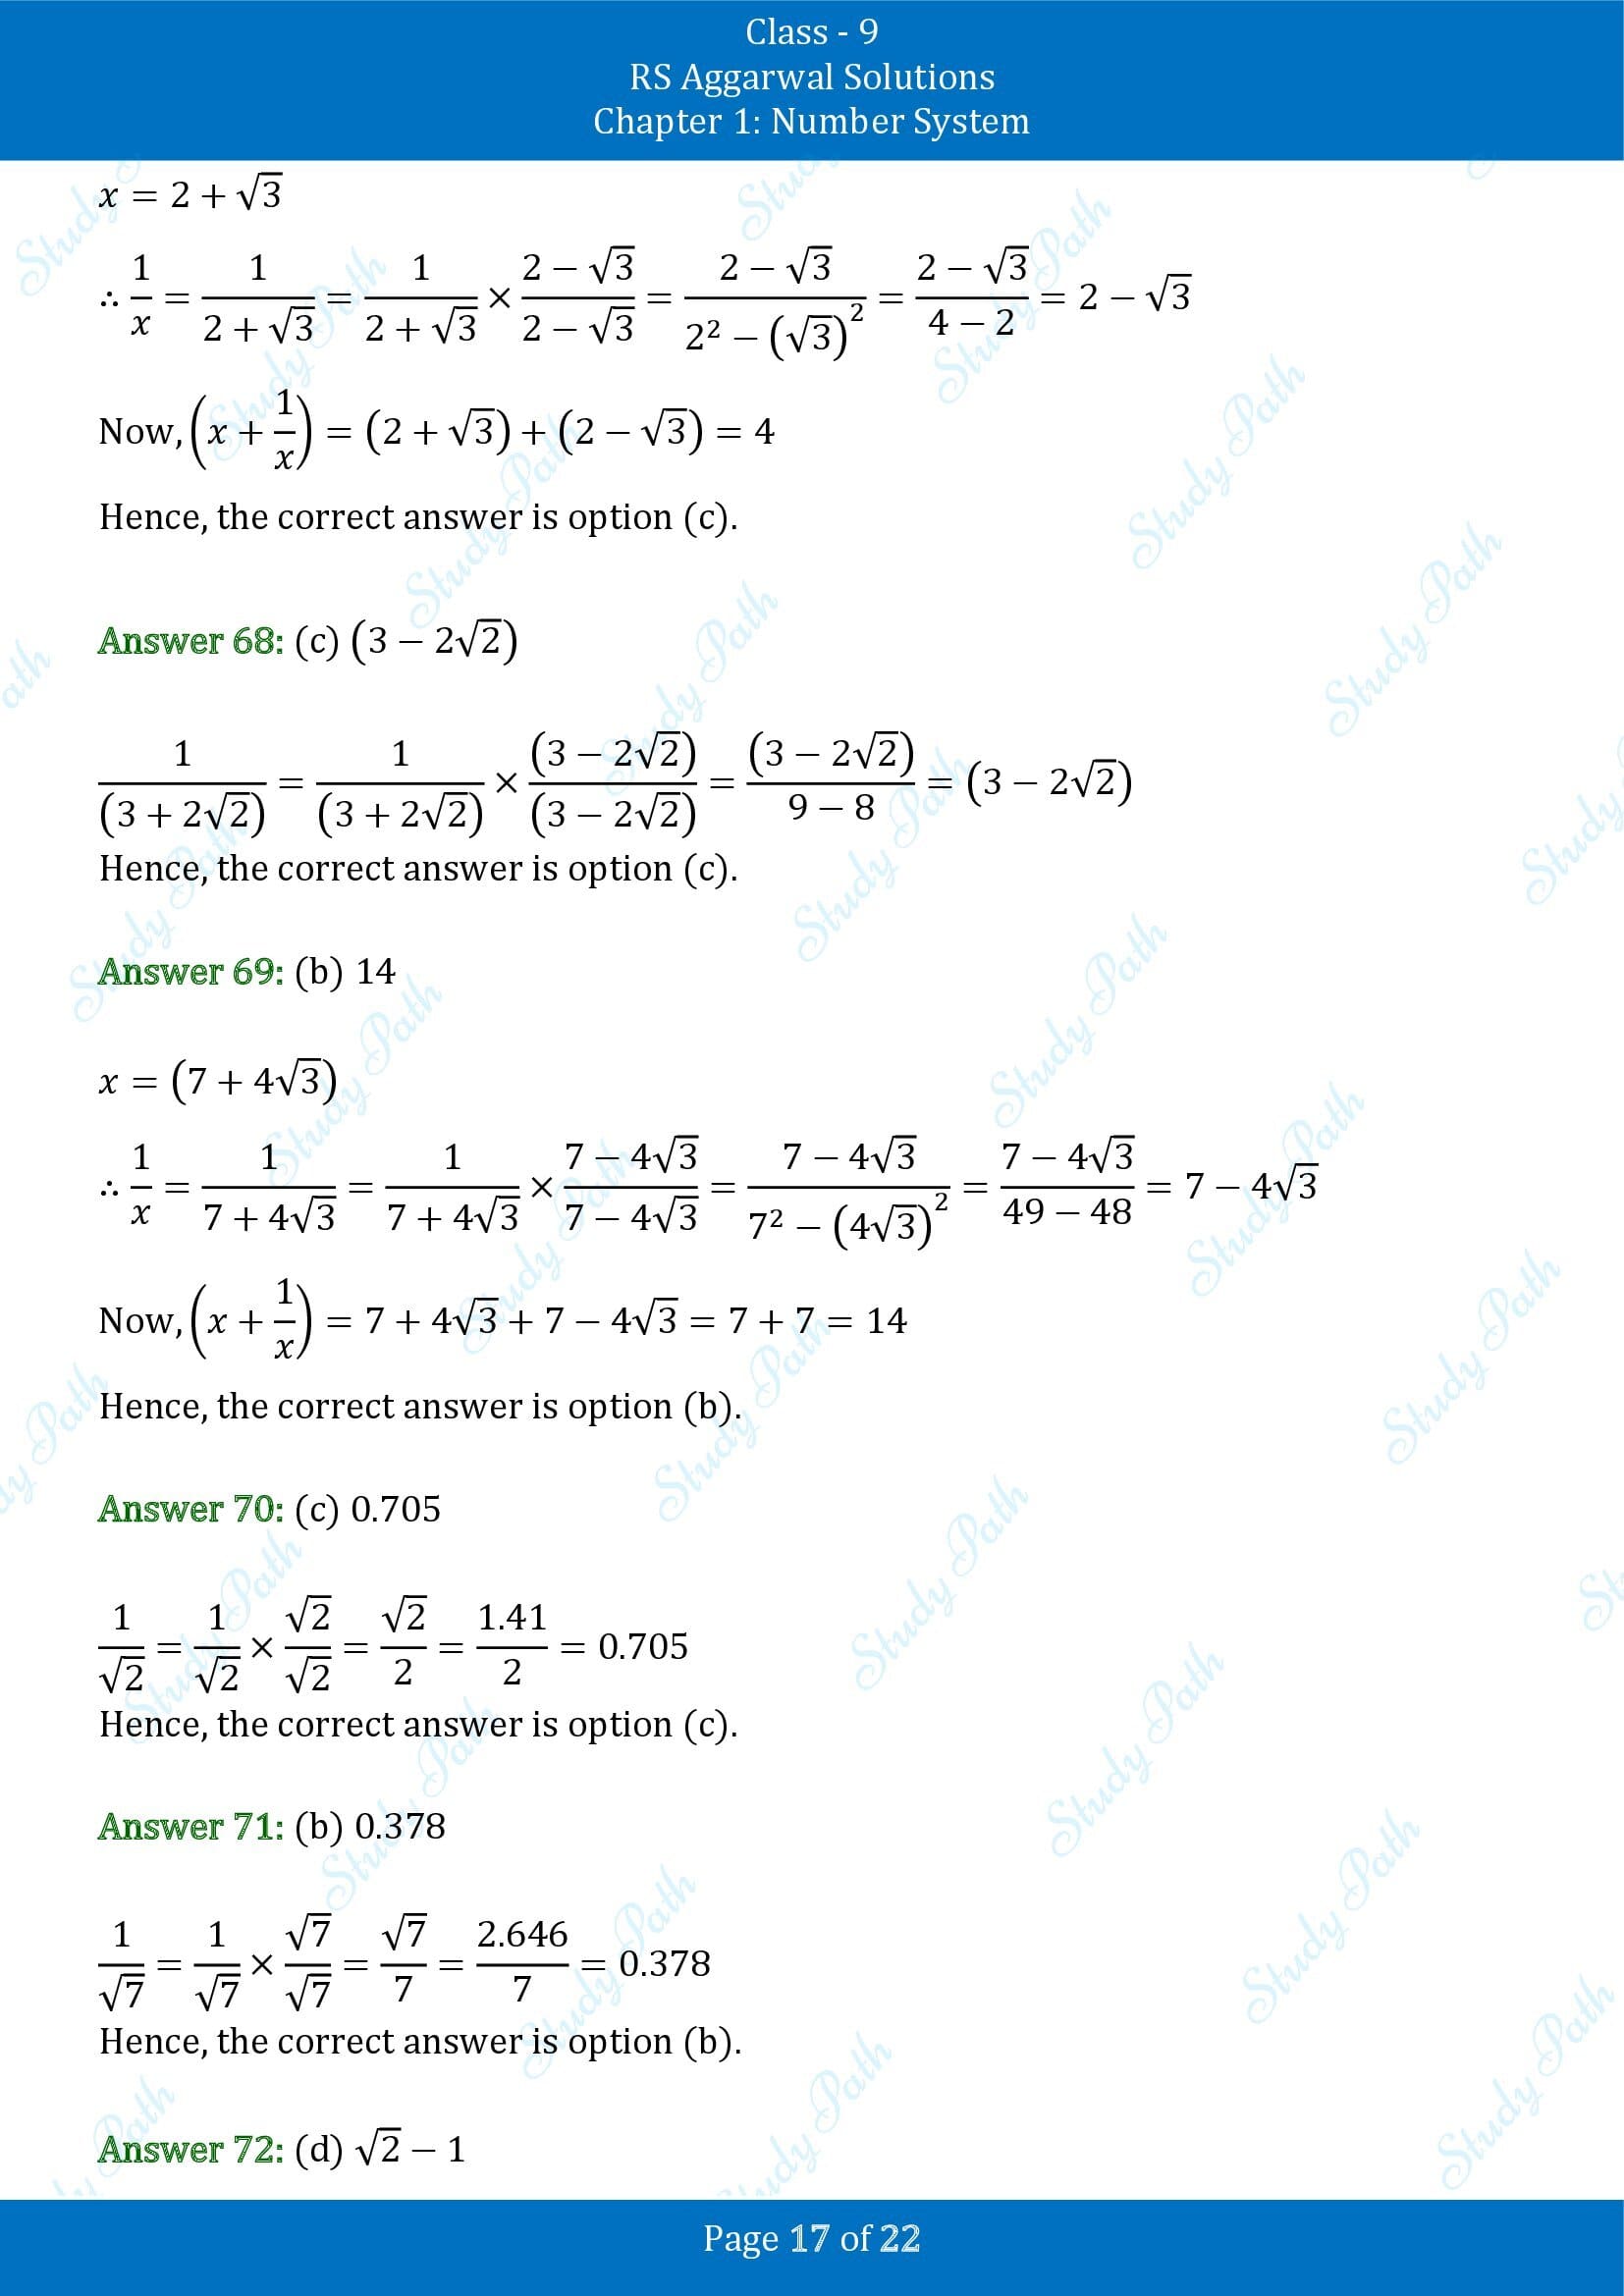 RS Aggarwal Solutions Class 9 Chapter 1 Number System Multiple Choice Questions MCQs 00017